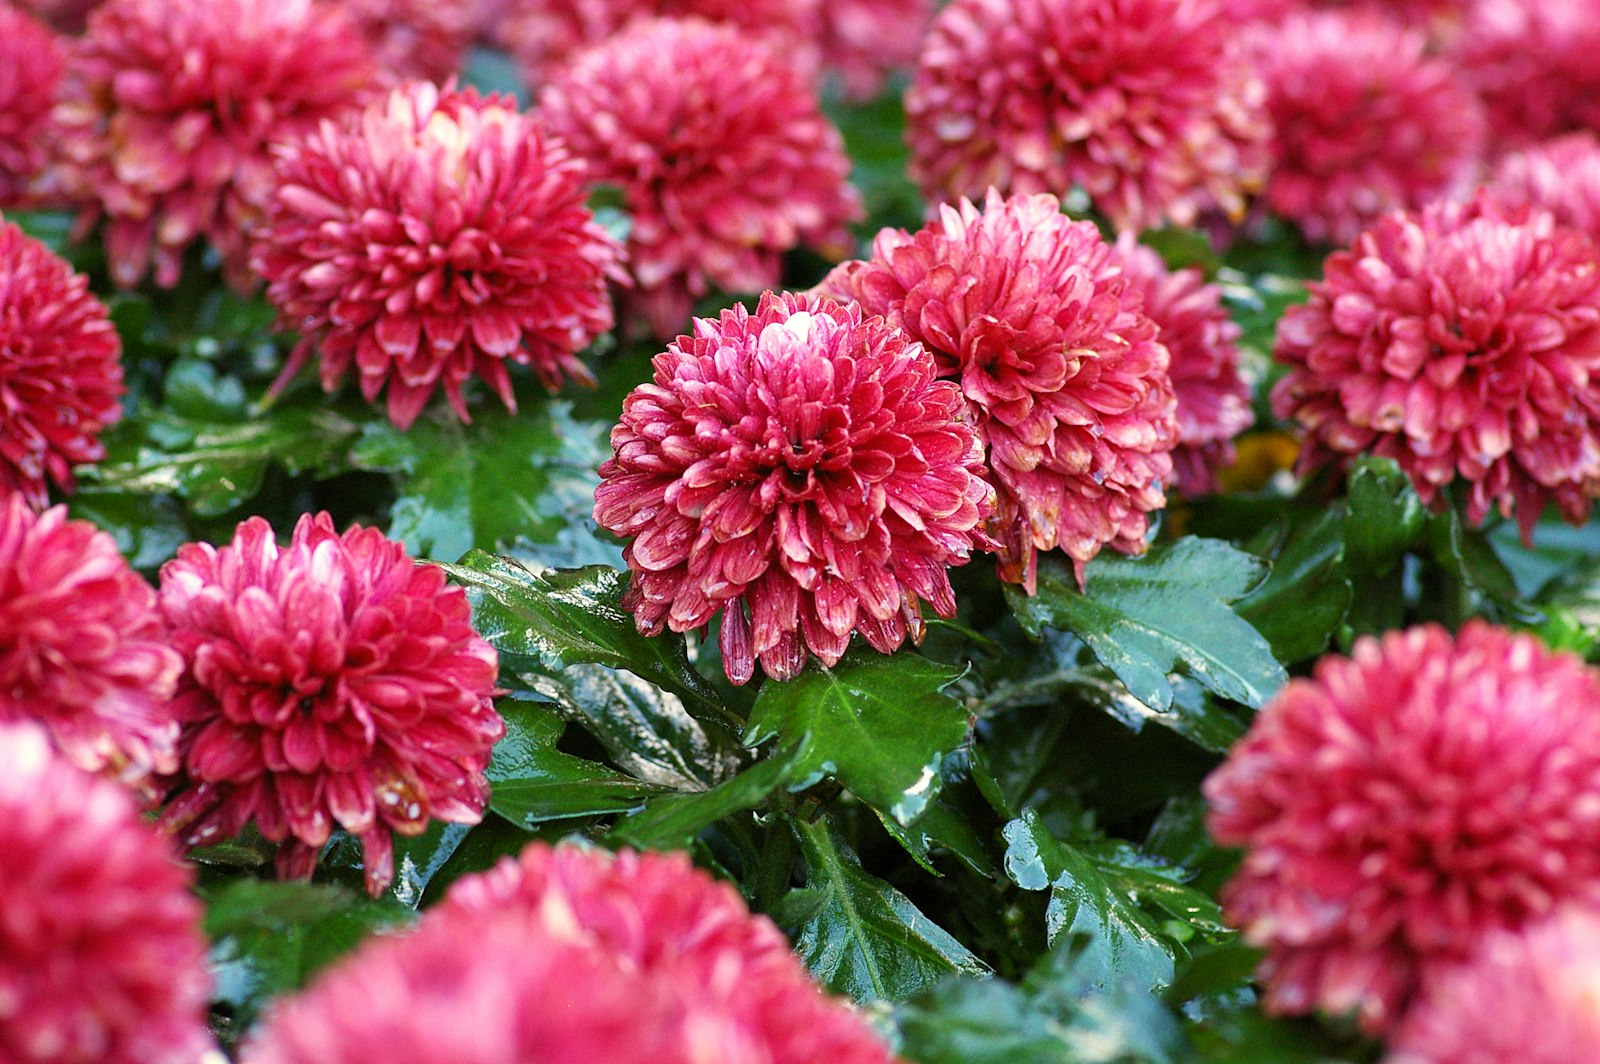 Pentax K100D Super sample photo. Blooming red petaled flowers photography